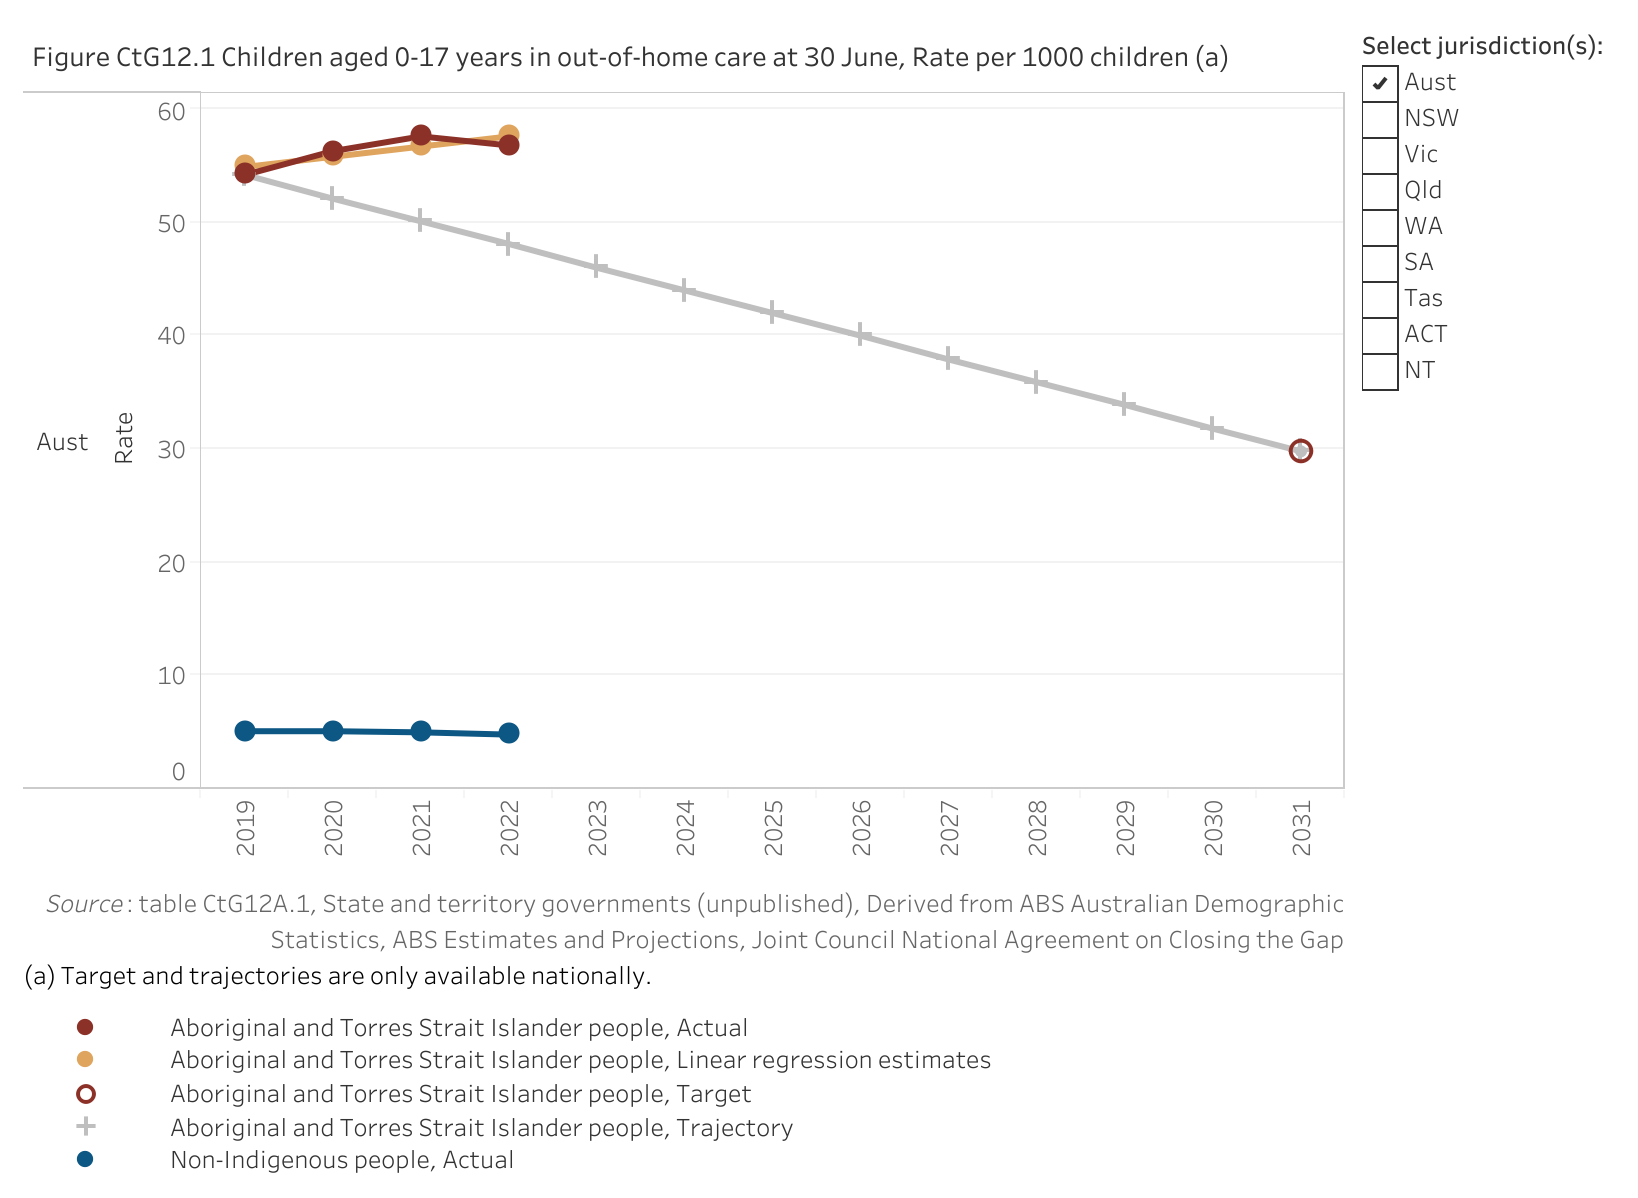 Figure CtG12.1 shows children aged 0-17 years in out-of-home care at 30 June, Rate per 1000 children. More details can be found within the text near this image.